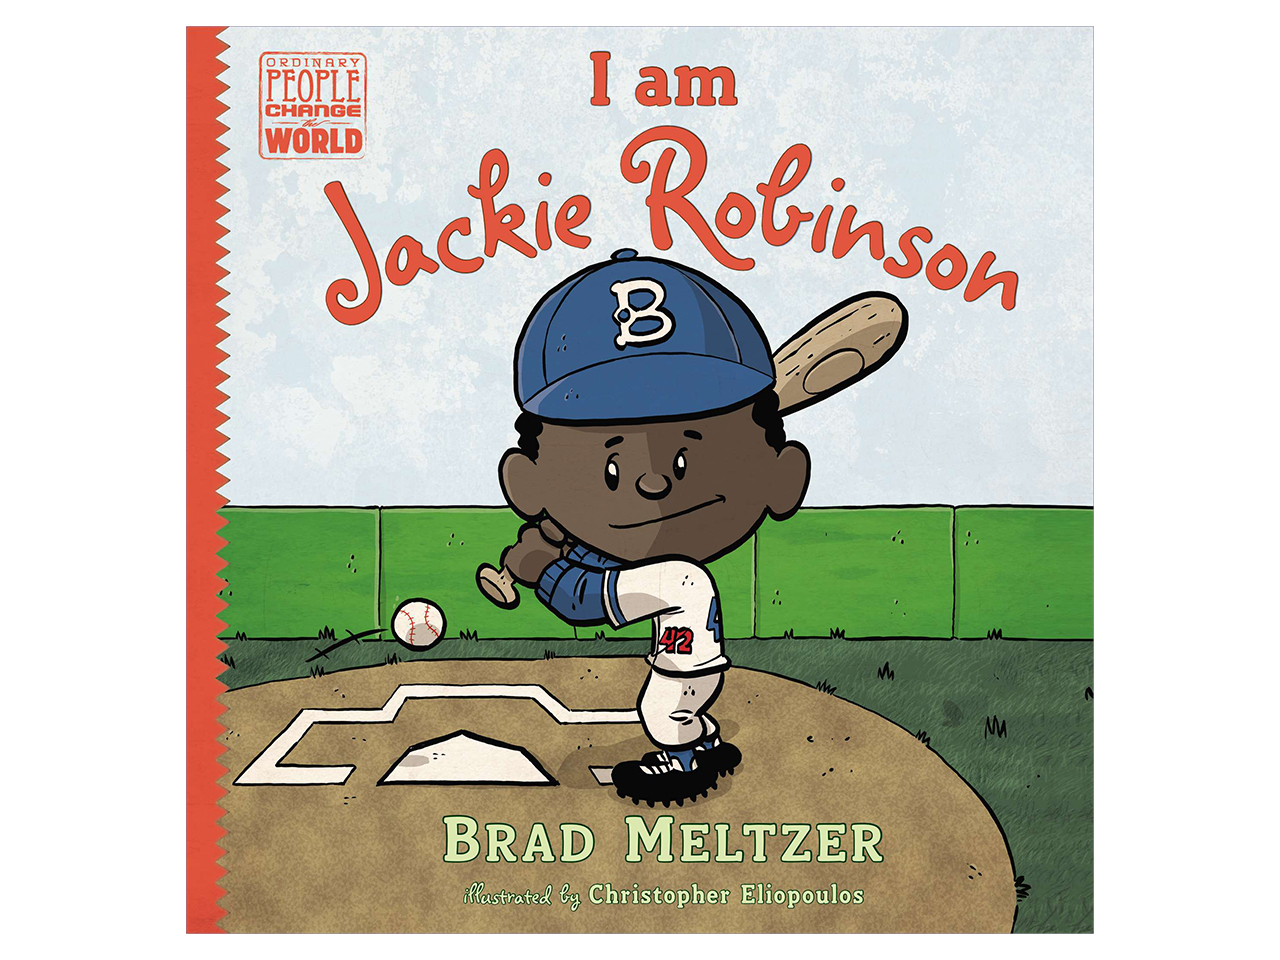 Jackie Robinson - Family & Children's Services